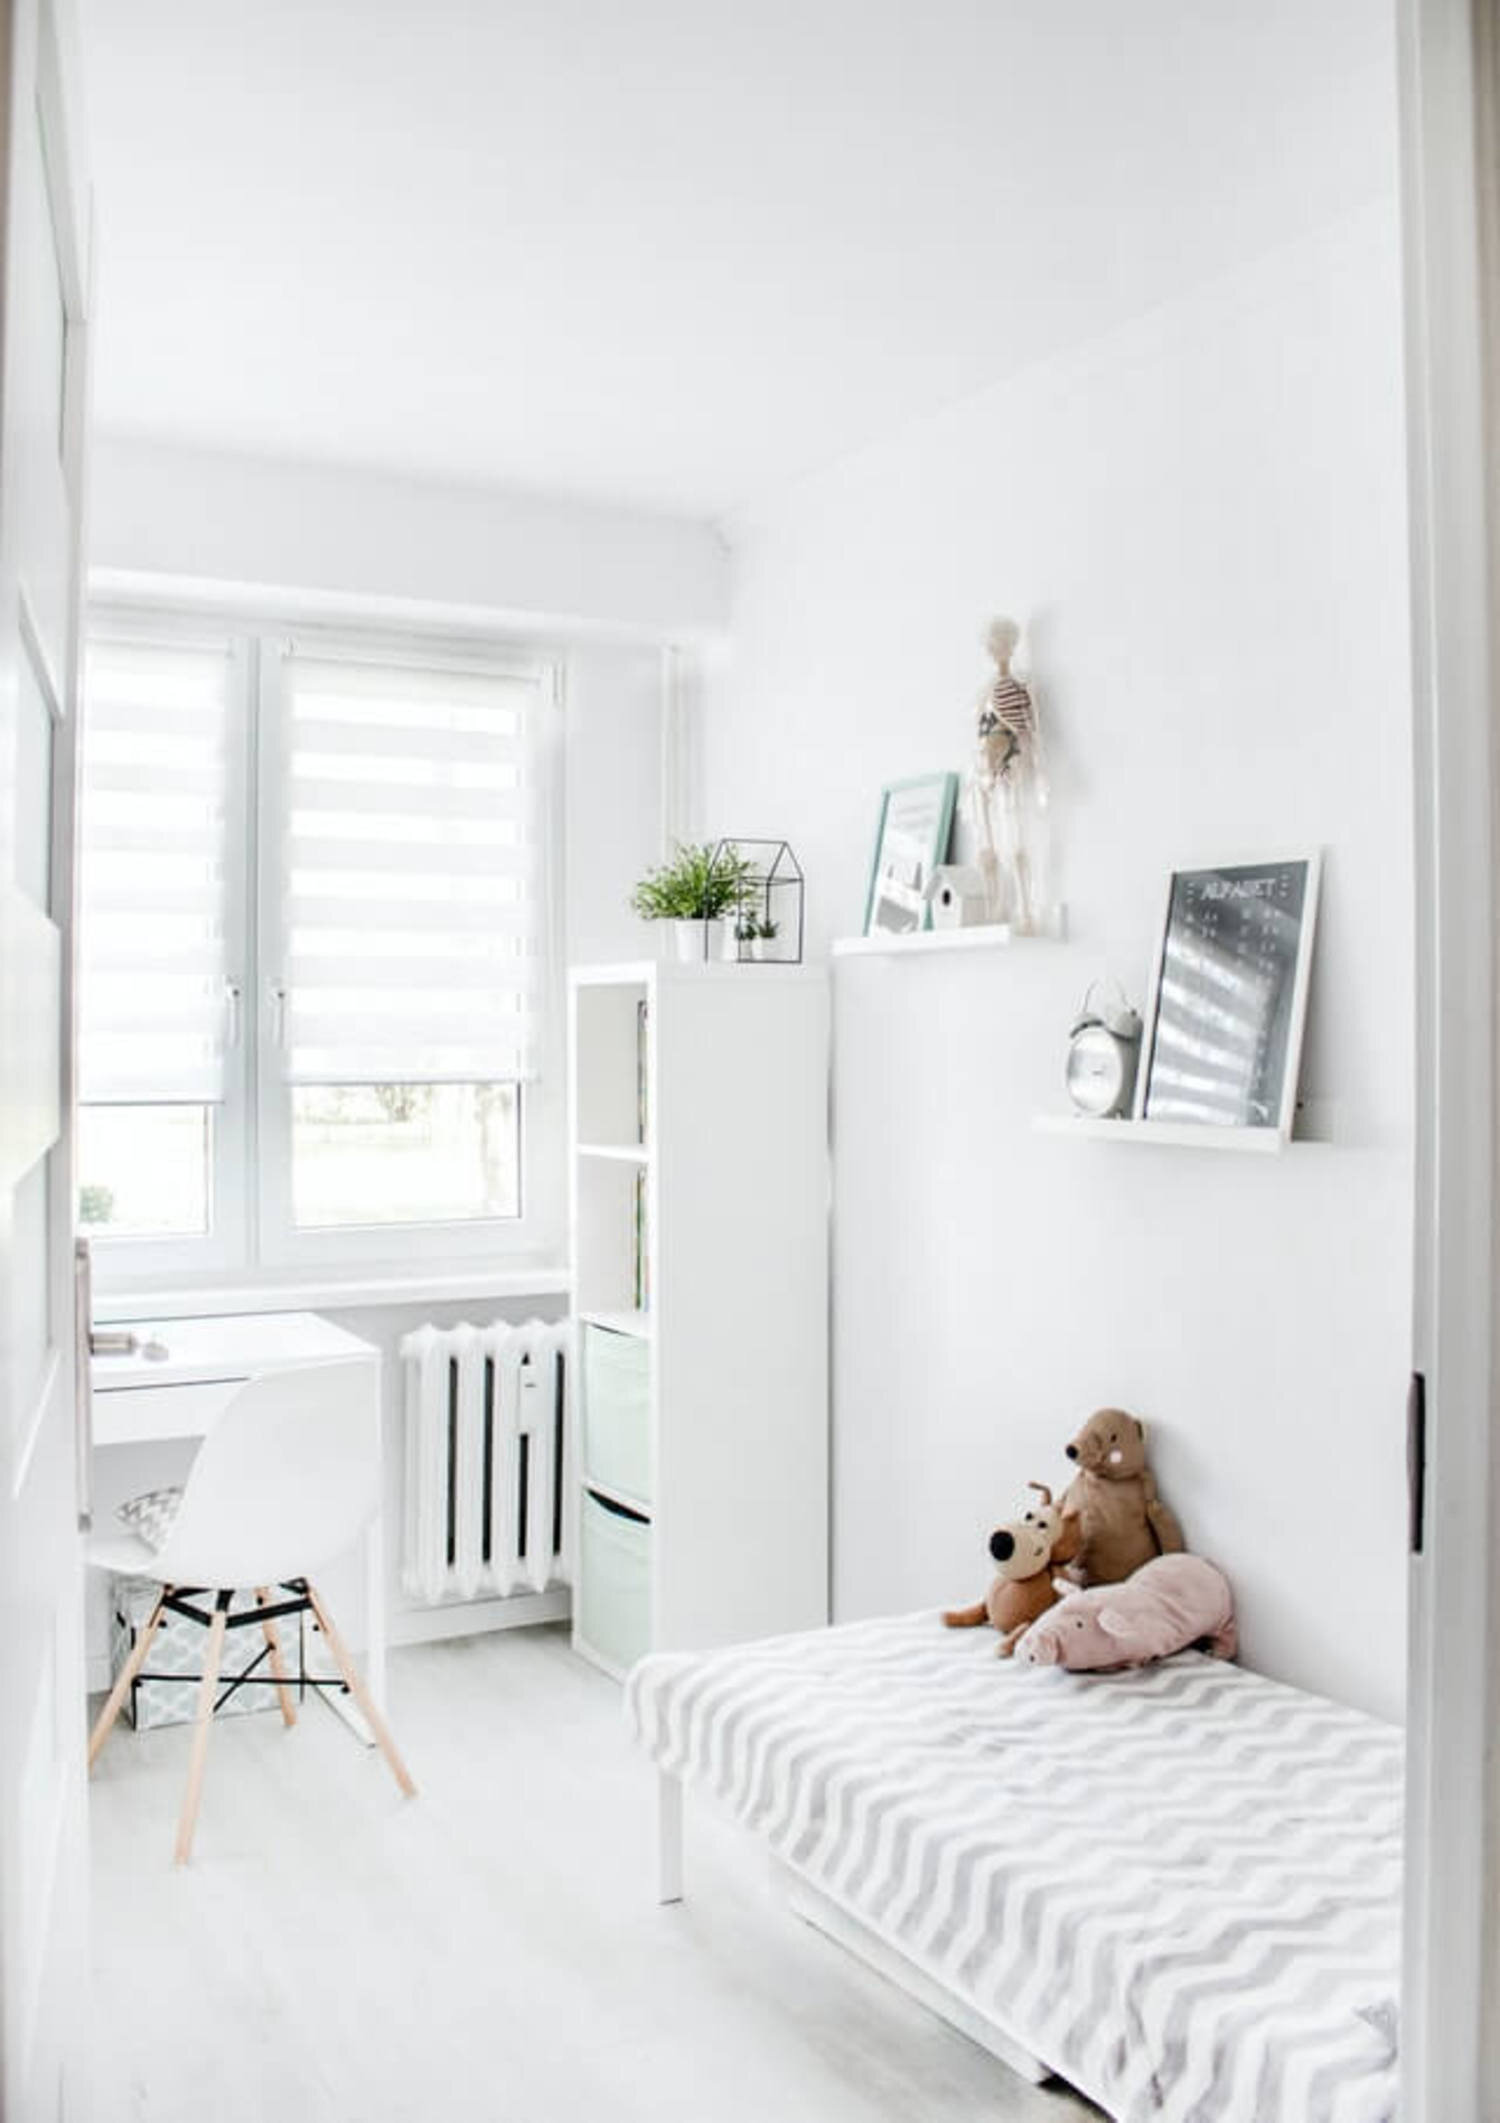 What is the best window dressing for a childs room_blog choosing window treatments _wowedesign.com.jpg